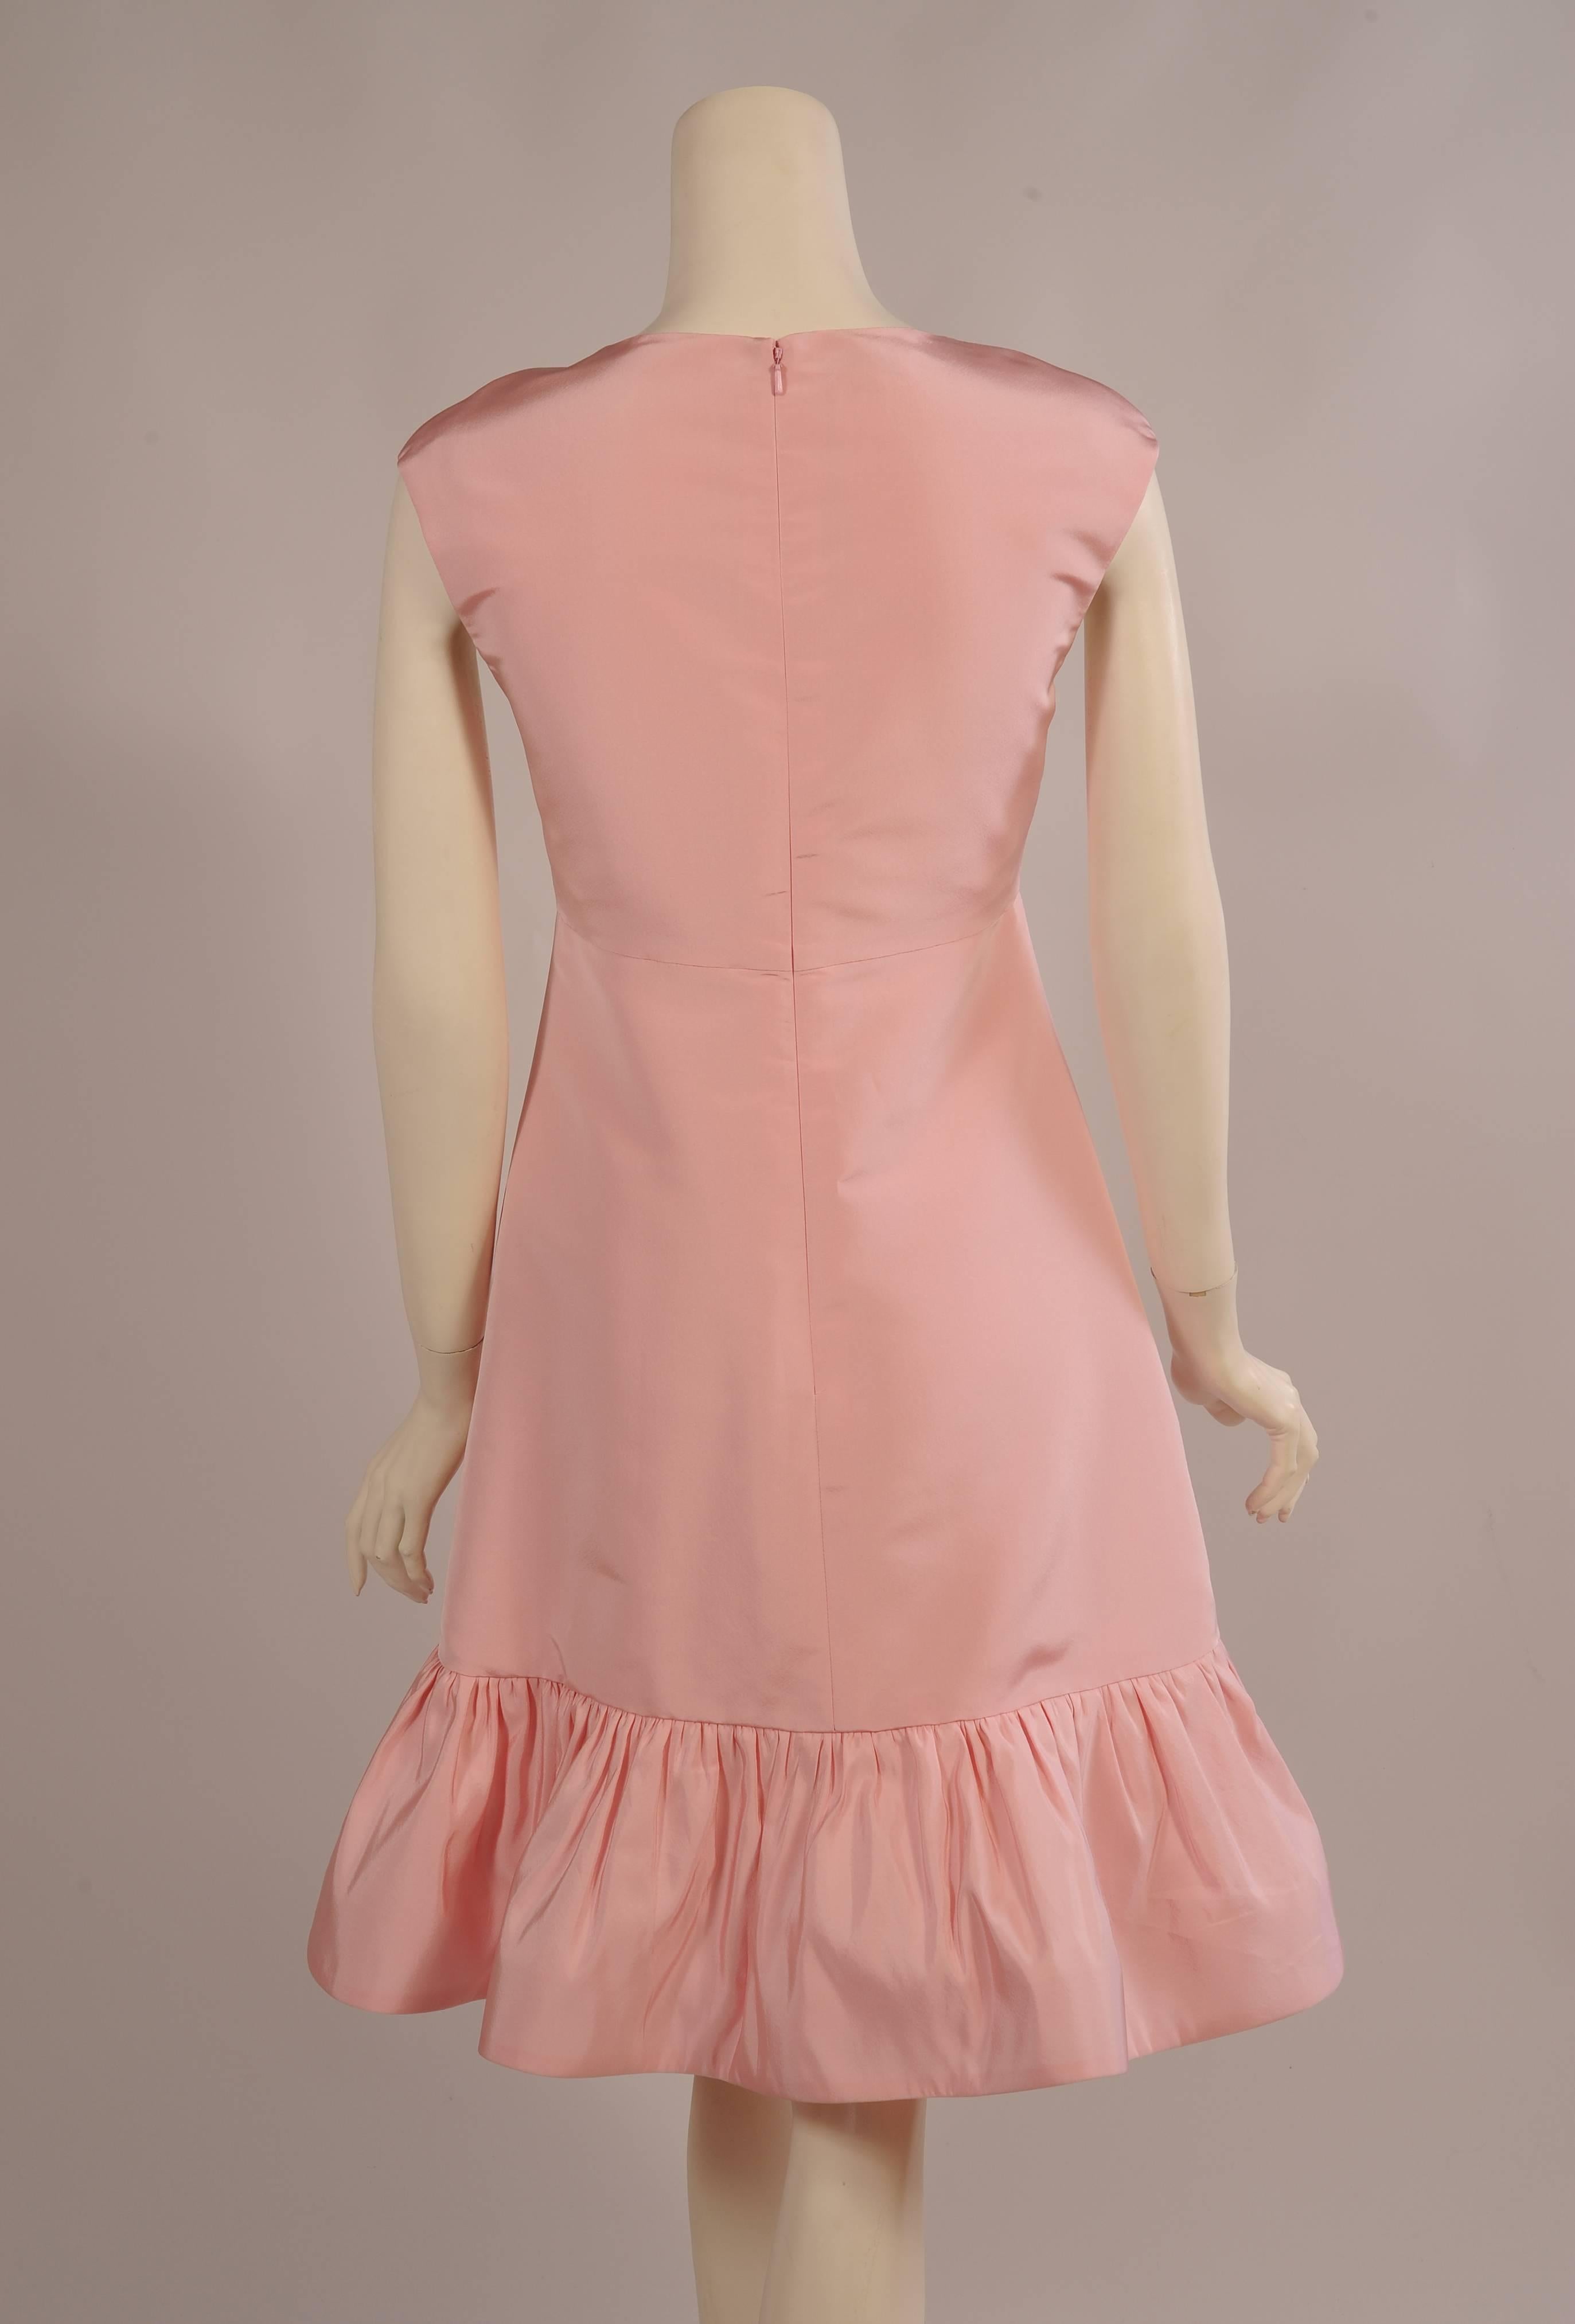 Oscar de la Renta Pink Silk Dress with Ruffled Hem In Excellent Condition In New Hope, PA